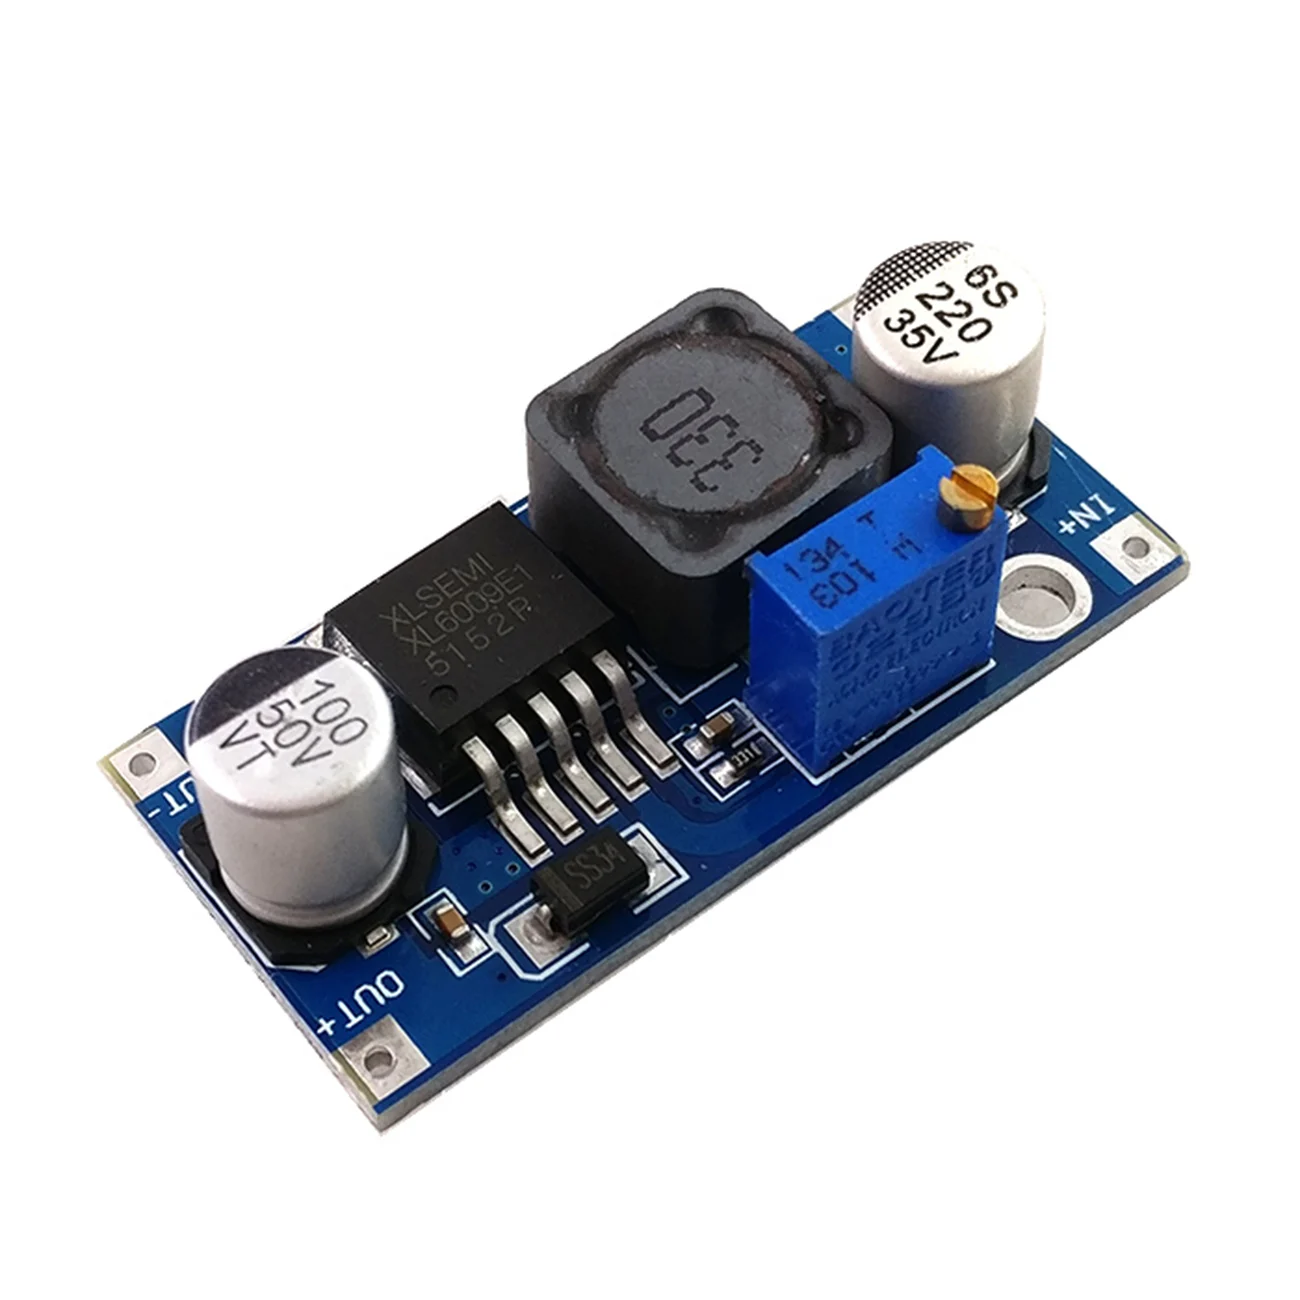 DC-DC Adjustable Step-up boost Power Converter Module XL6009 Replace LM2577 SP 